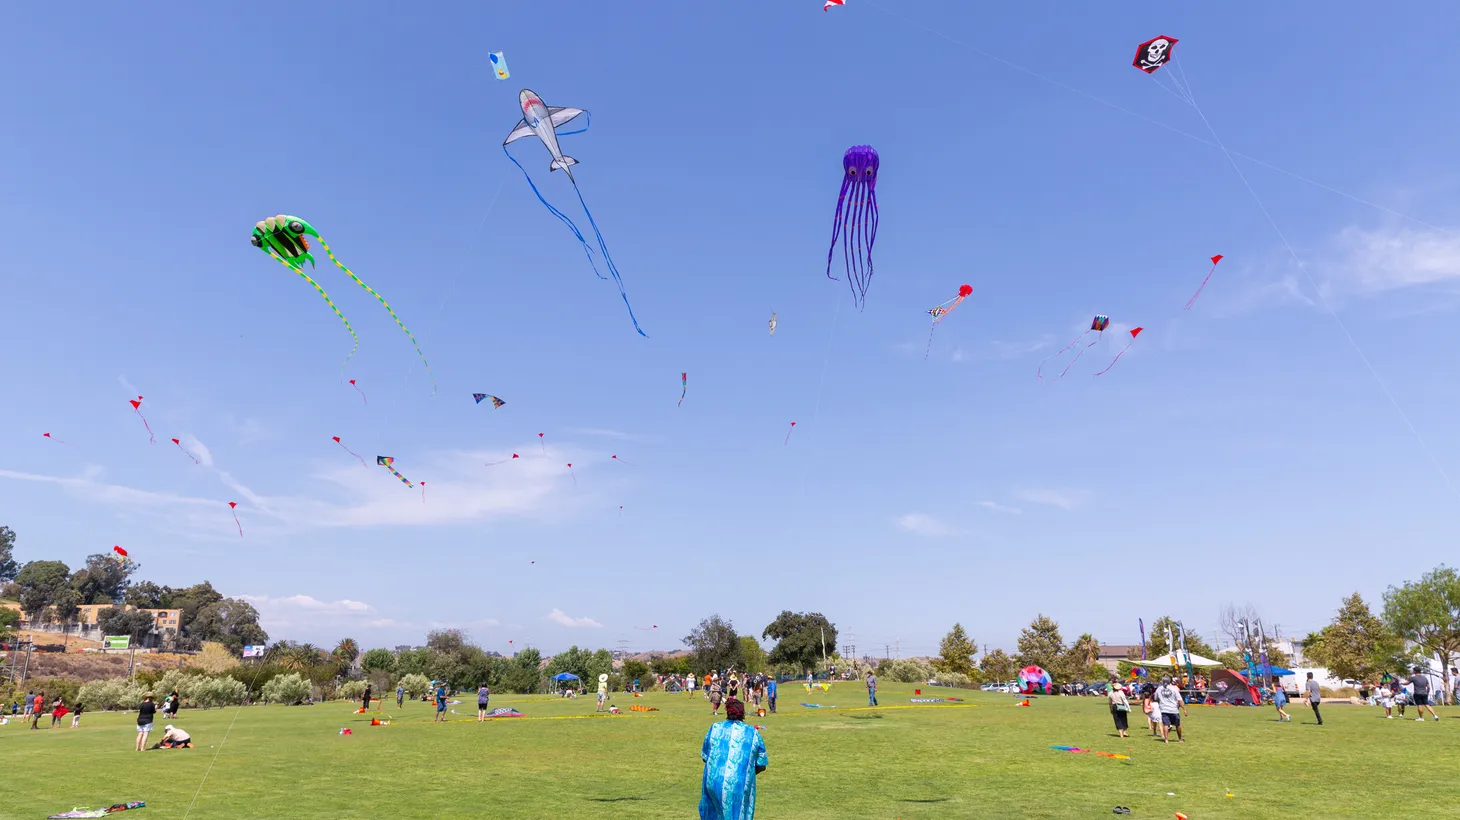 Kite masters will be on hand Saturday at Los Angeles State Historic Park to teach kite making and flying skills to participants. And it’s all free.